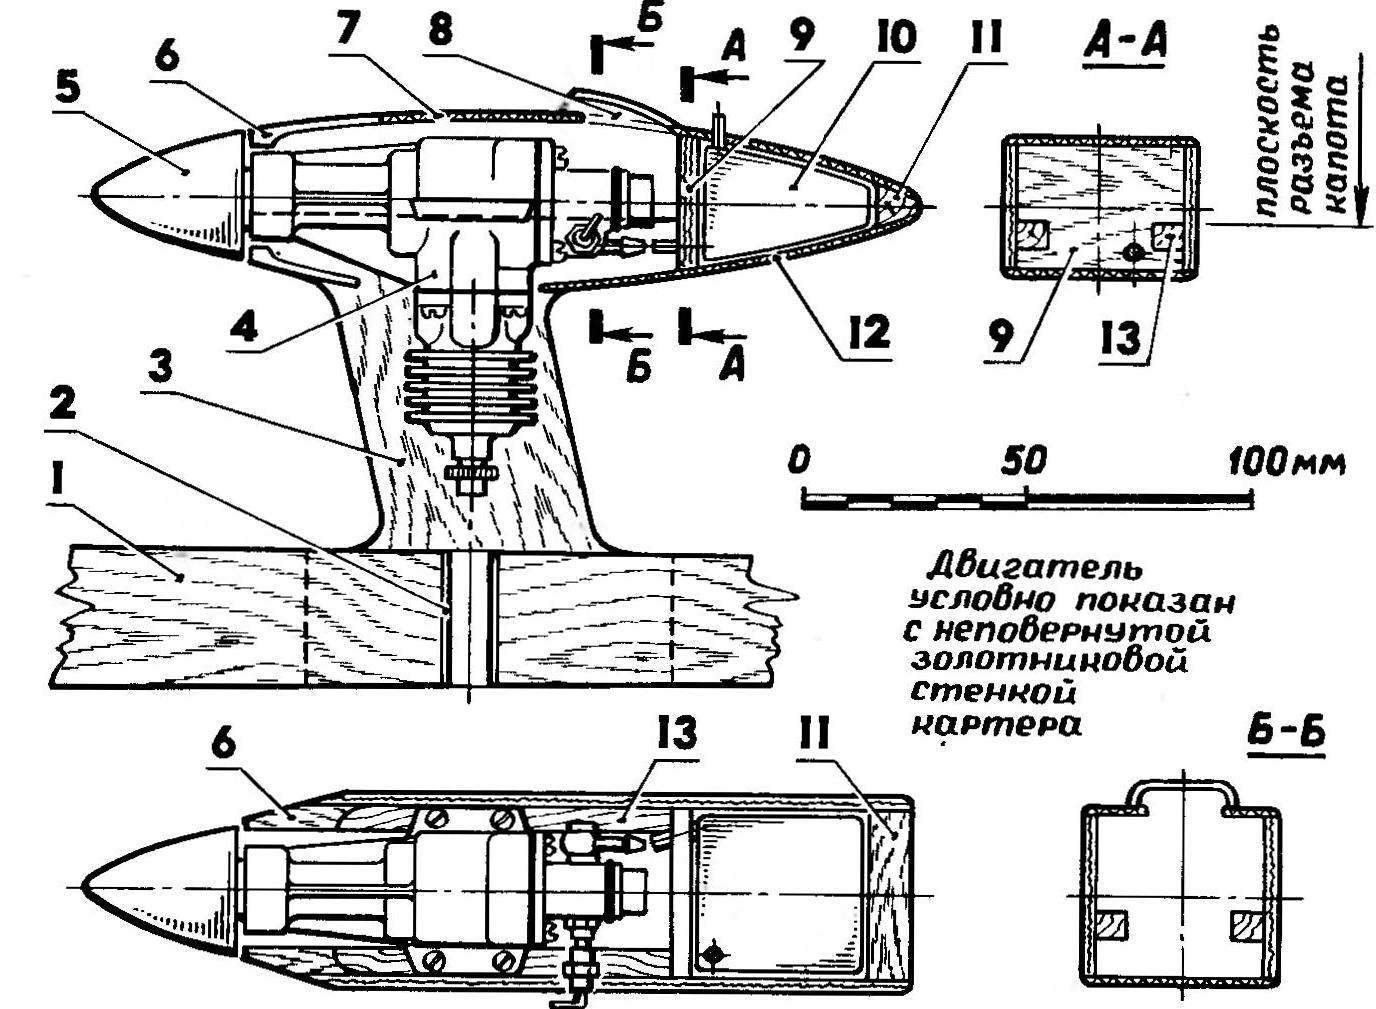 Fig. 5. The engine